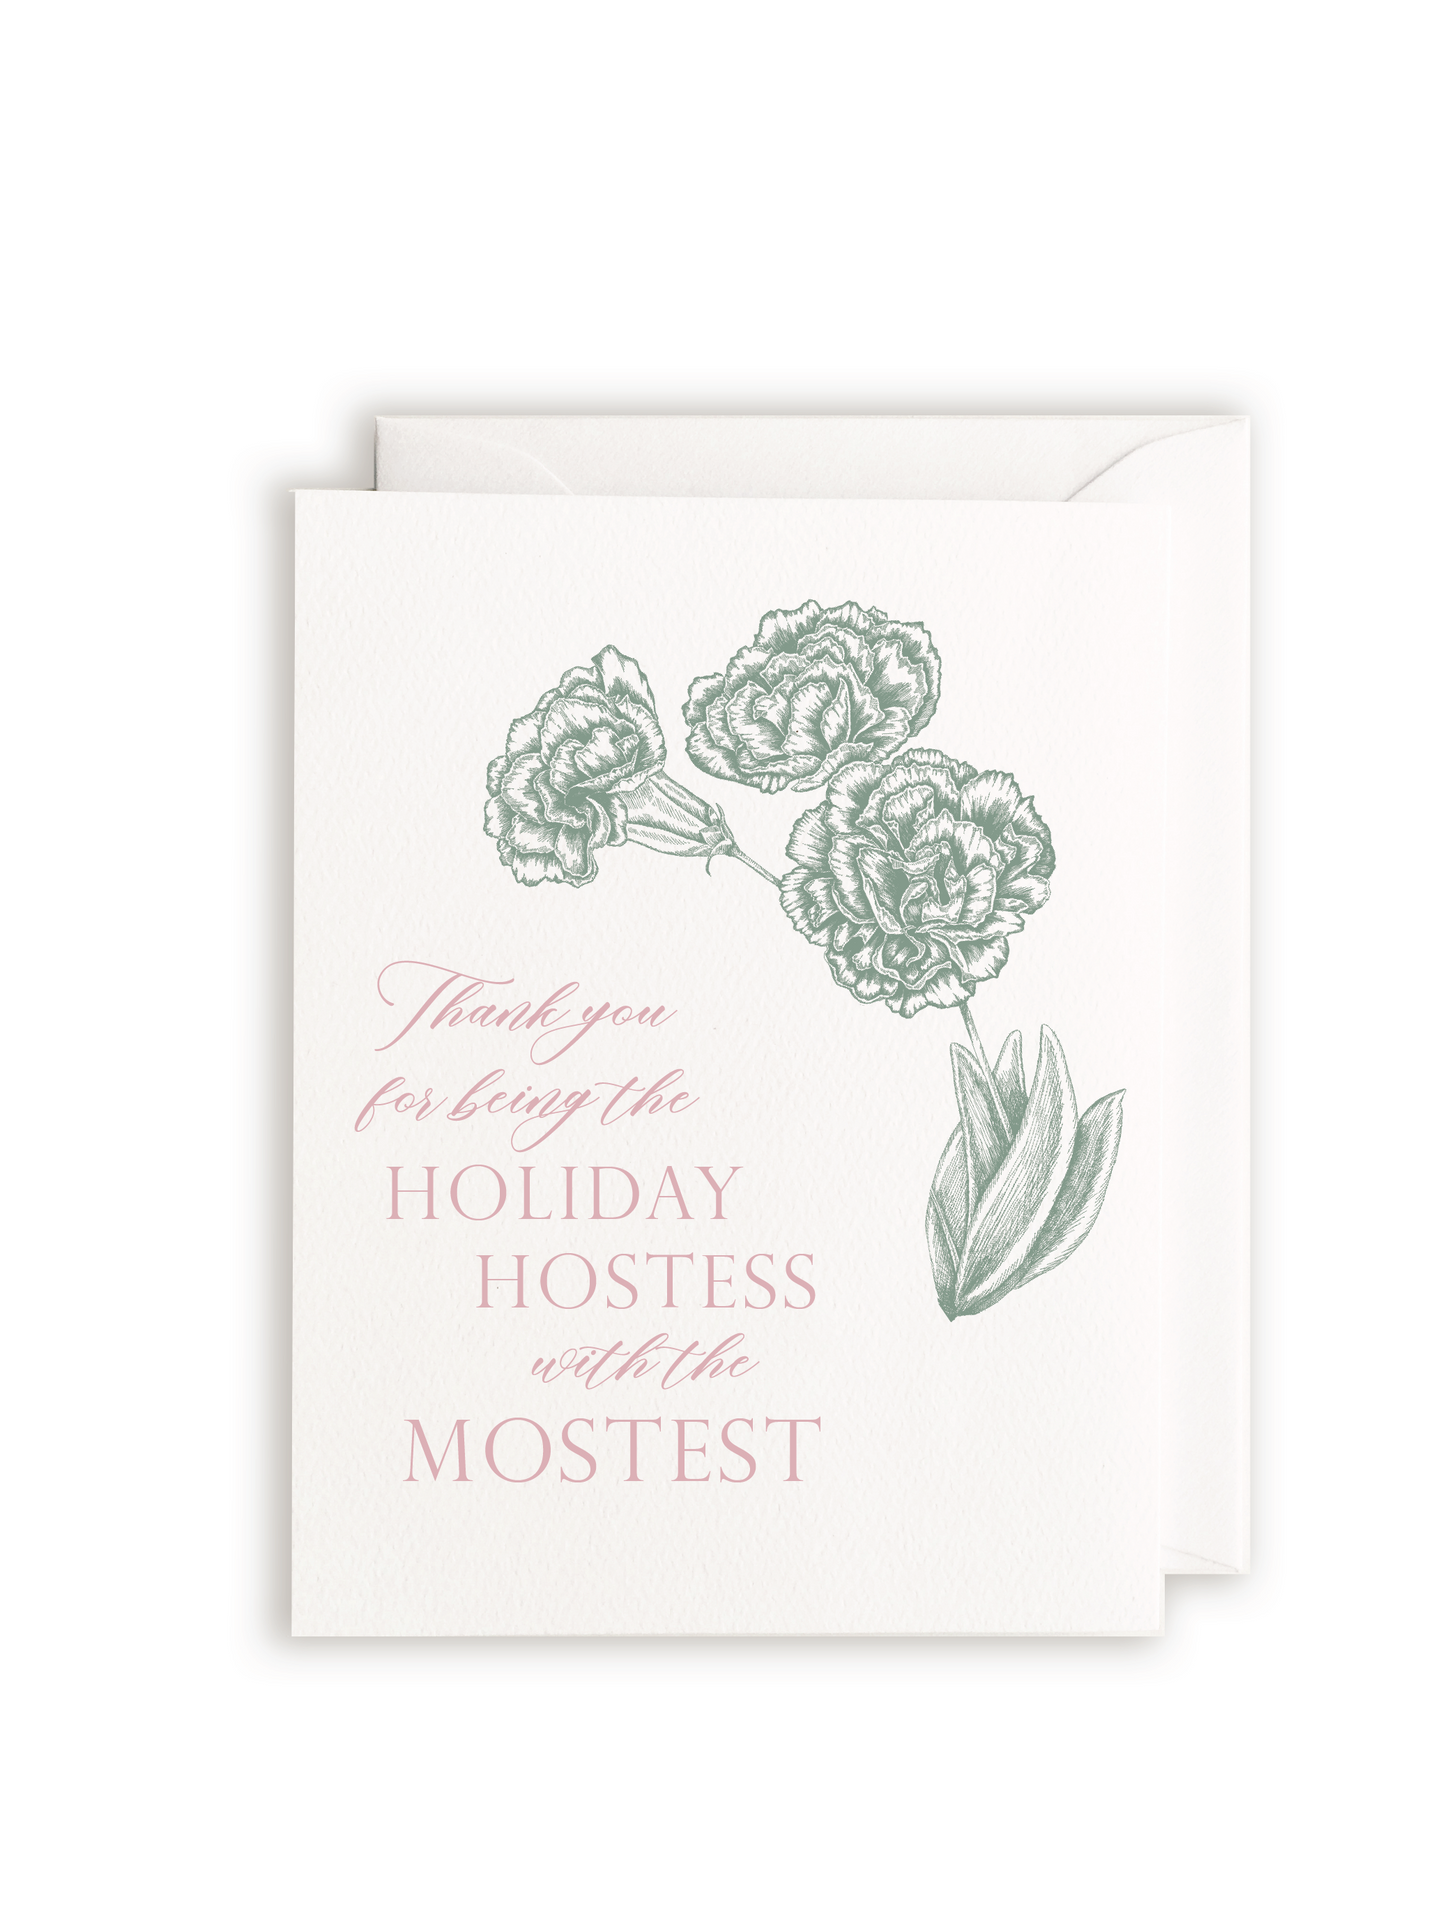 Holiday Hostess with the Mostest Letterpress Greeting Card